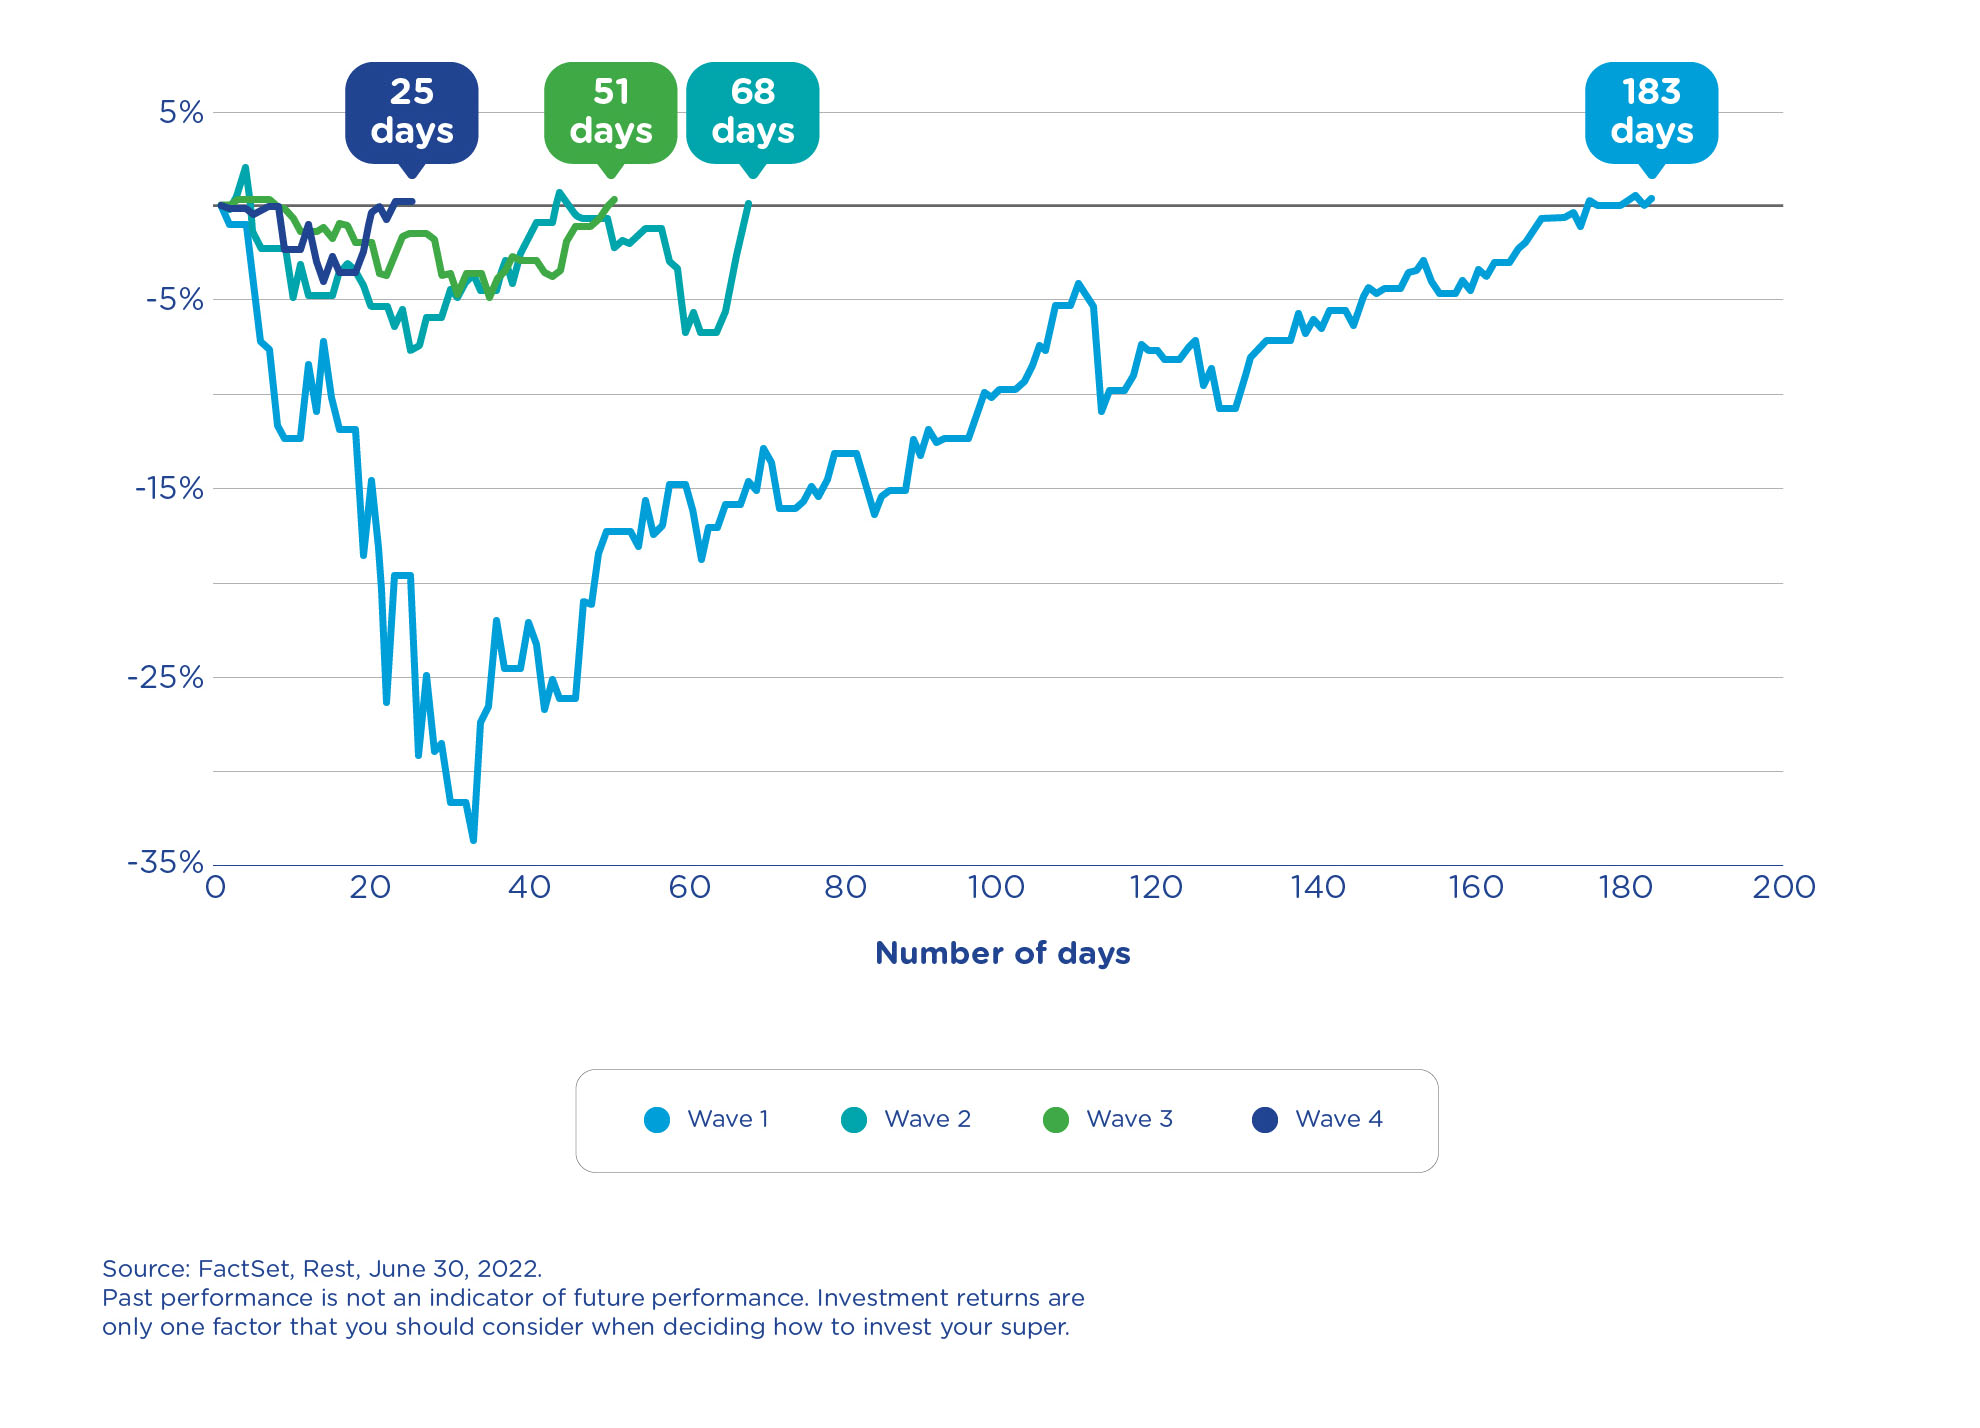 Graph showing how markets recovered faster from each wave of Covid - S&P 500 from 20 April 2020